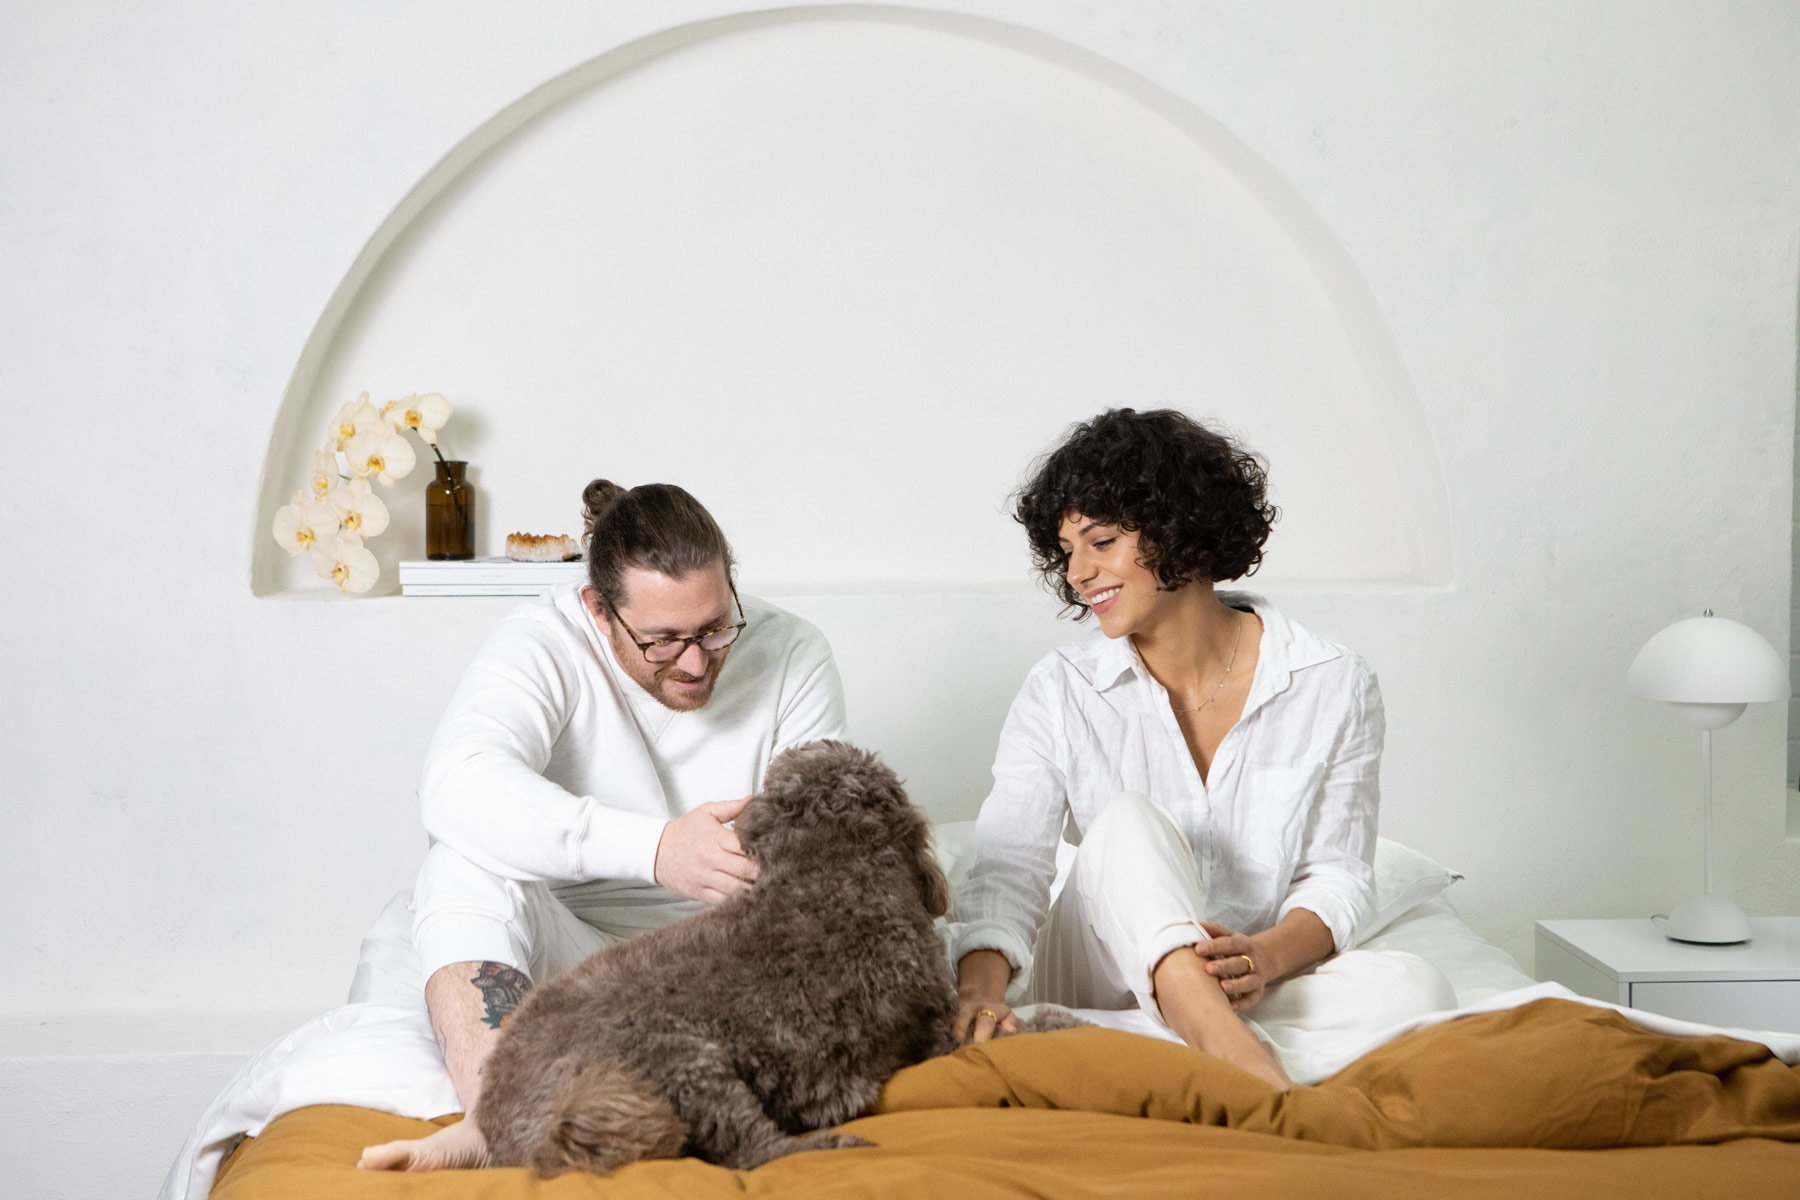 Shhh Silk Studio Photography Shoot, Silk Sheets lay on bed in stylised setting with a couple and dog